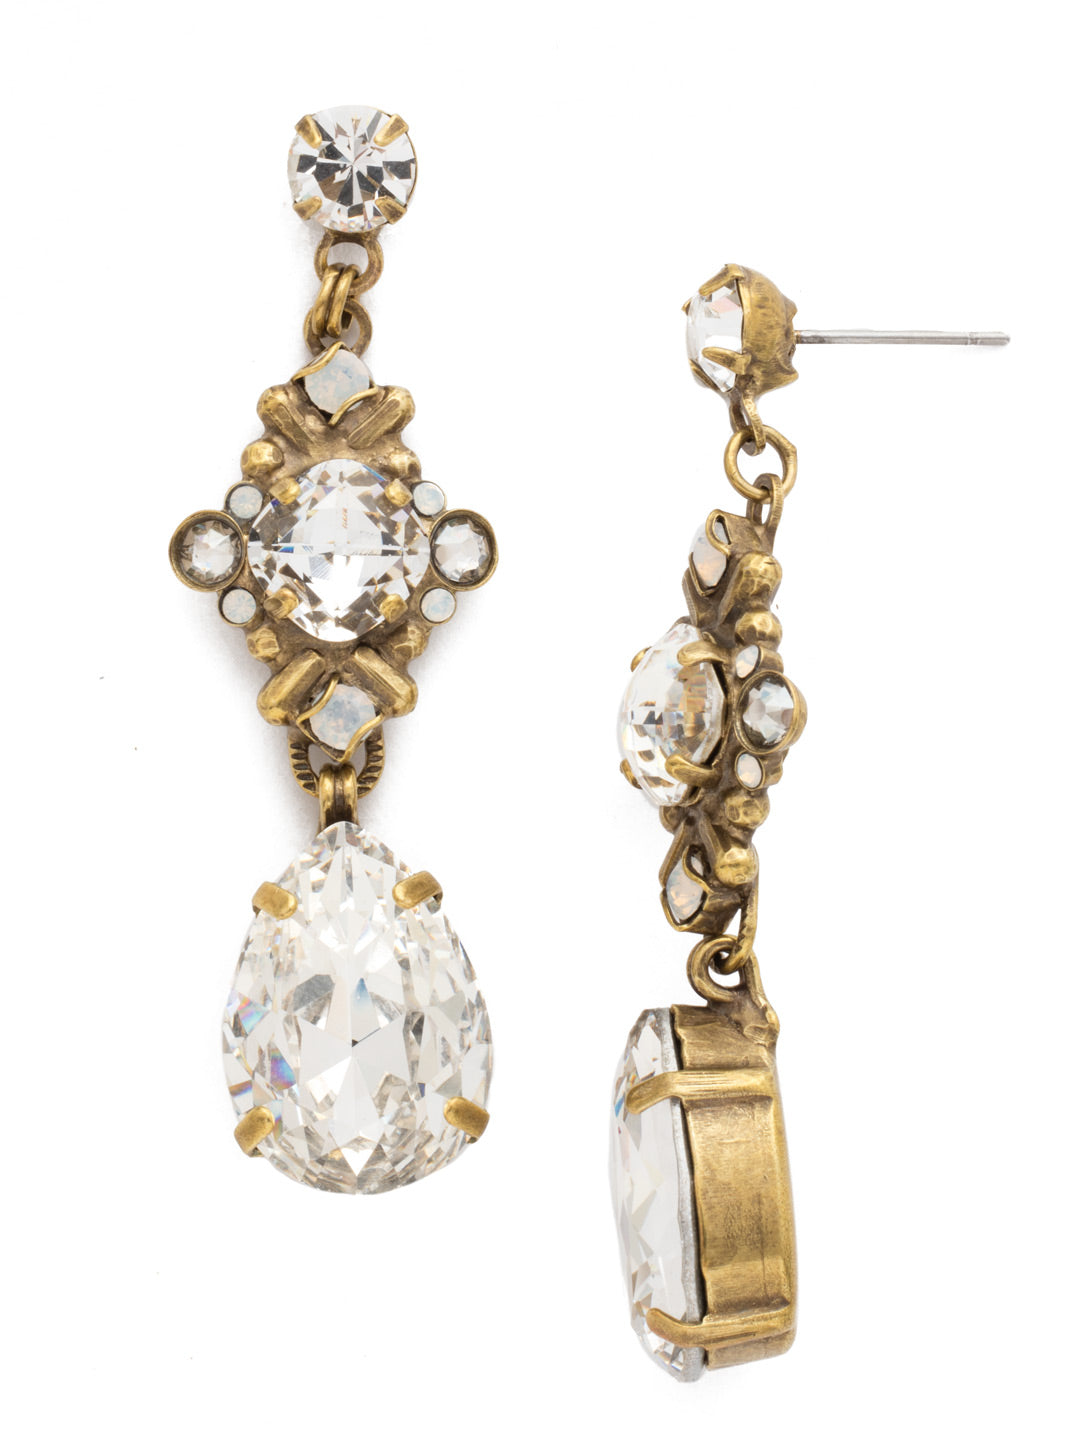 Acca Dangle Earrings - EDX26AGCLA - A three-layer dangling earring with a stud post, a pear shaped gem at the end, and an intricate design in the middle with a cushion cut antique stone in a crystal encrusted X design!